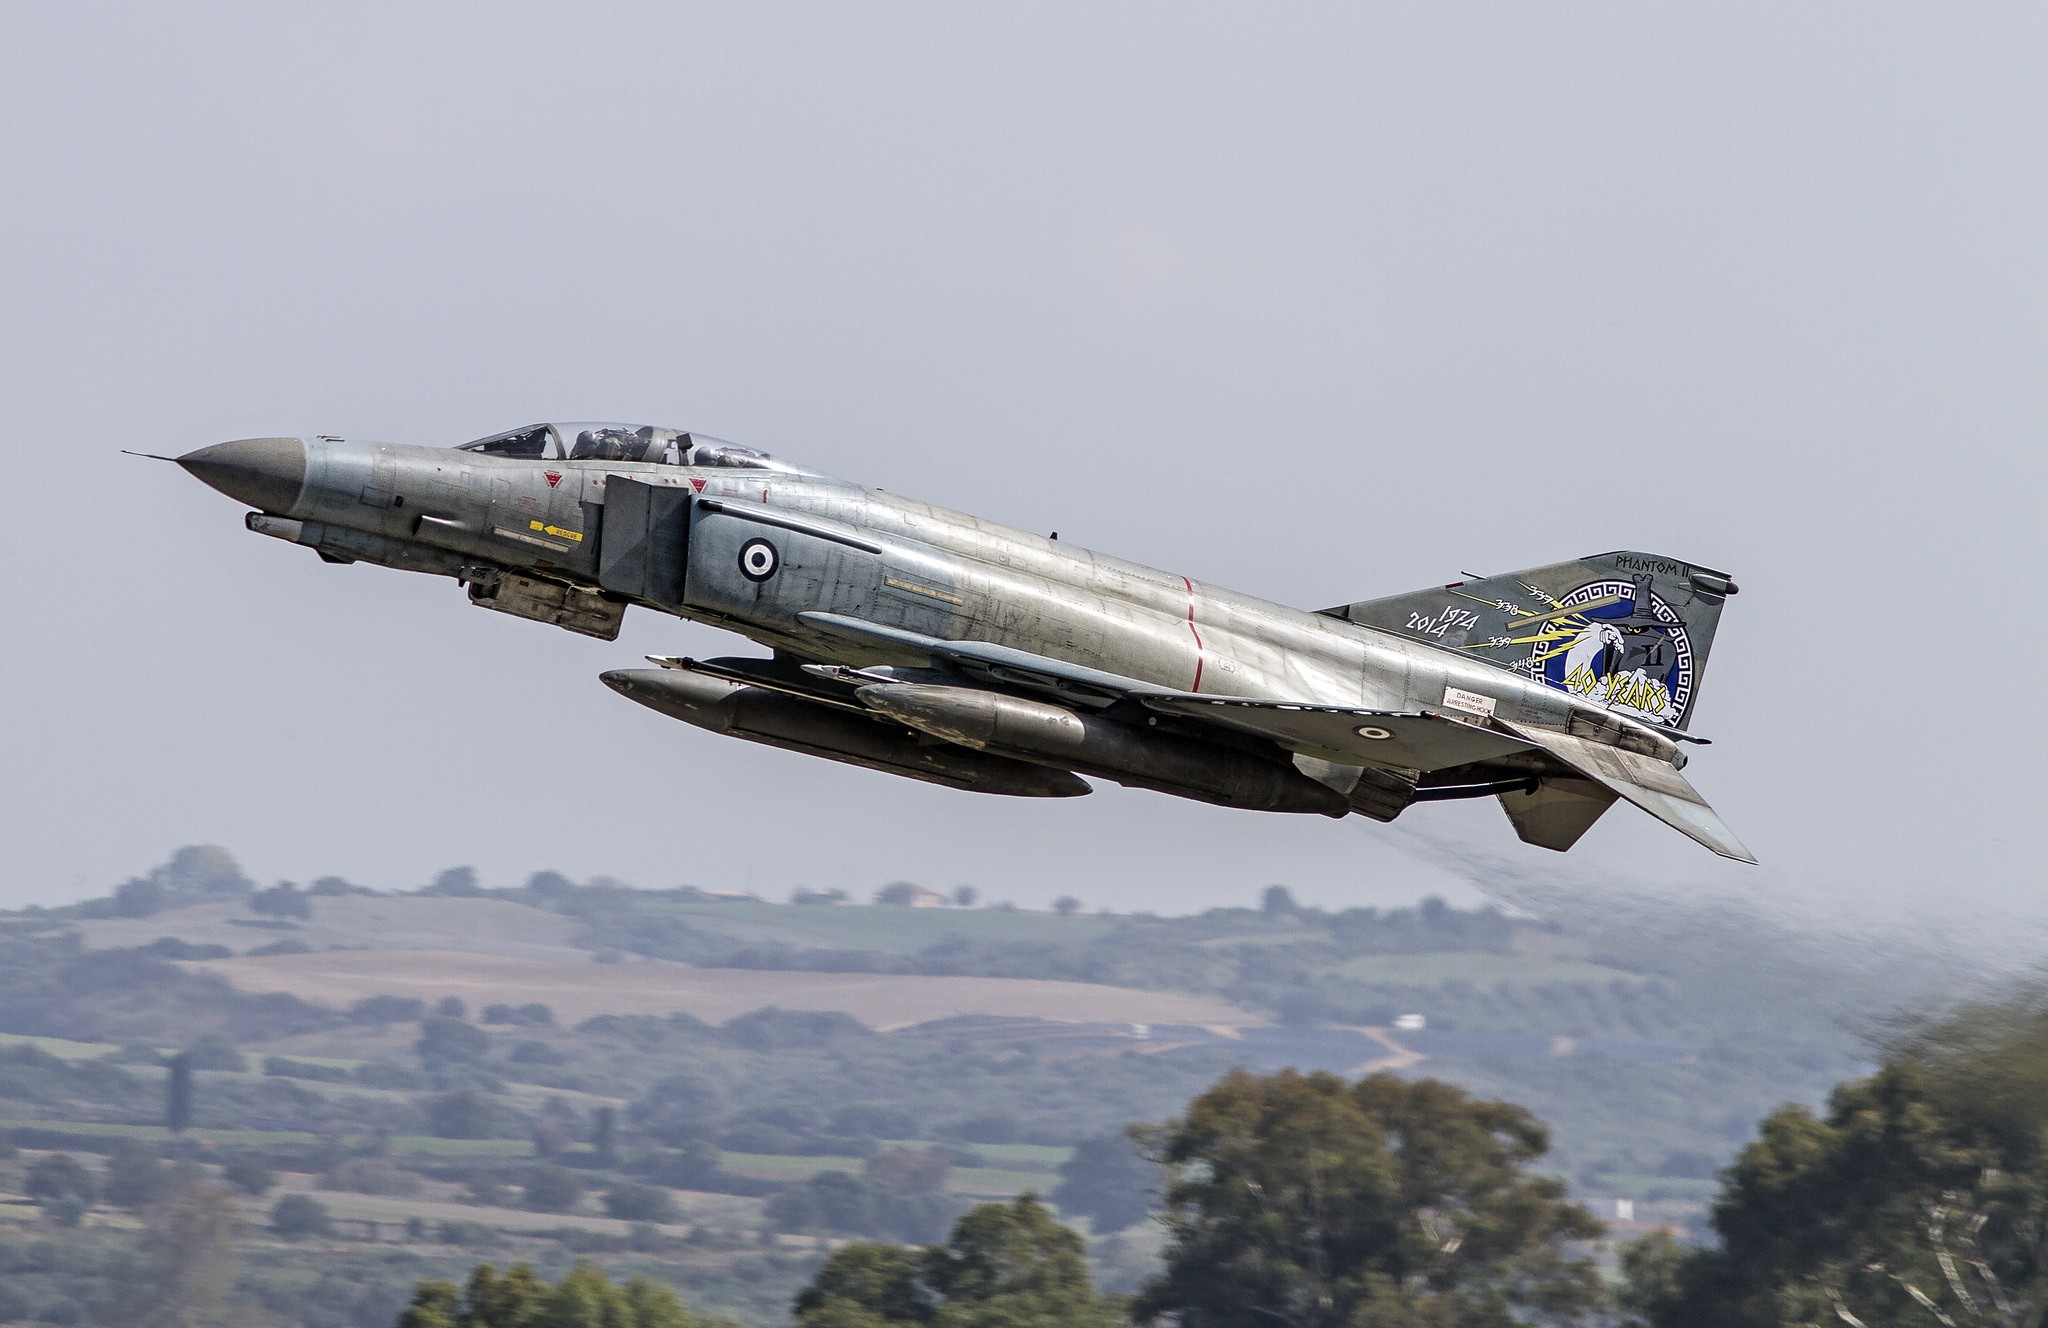 General 2048x1328 aircraft vehicle McDonnell Douglas McDonnell Douglas F-4 Phantom II military aircraft military vehicle Hellenic Air Force jet fighter take-off American aircraft